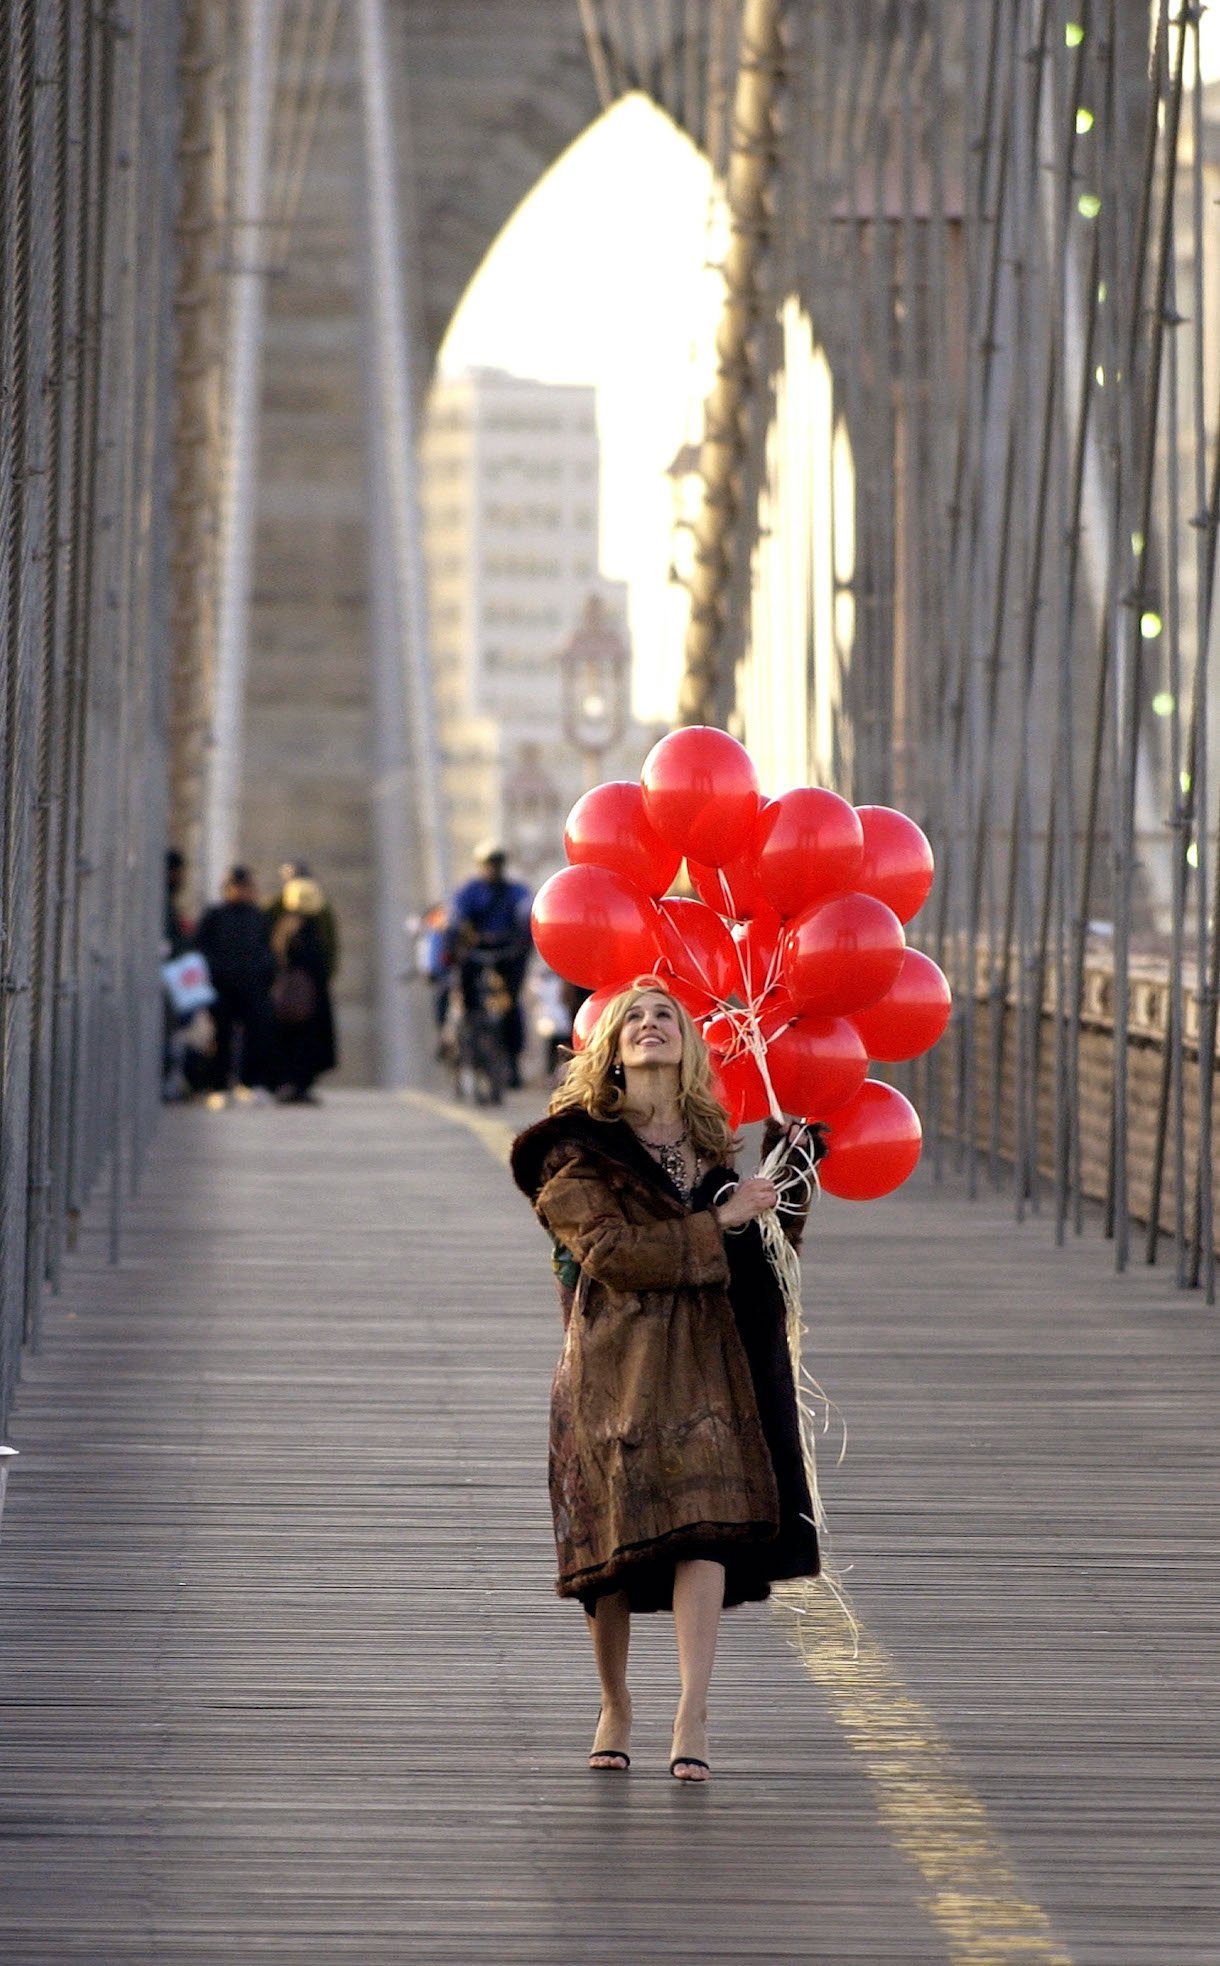 Actress Sarah Jessica Parker shoots a promotional video for the hit HBO series, "Sex and the City" on Brooklyn Bridge